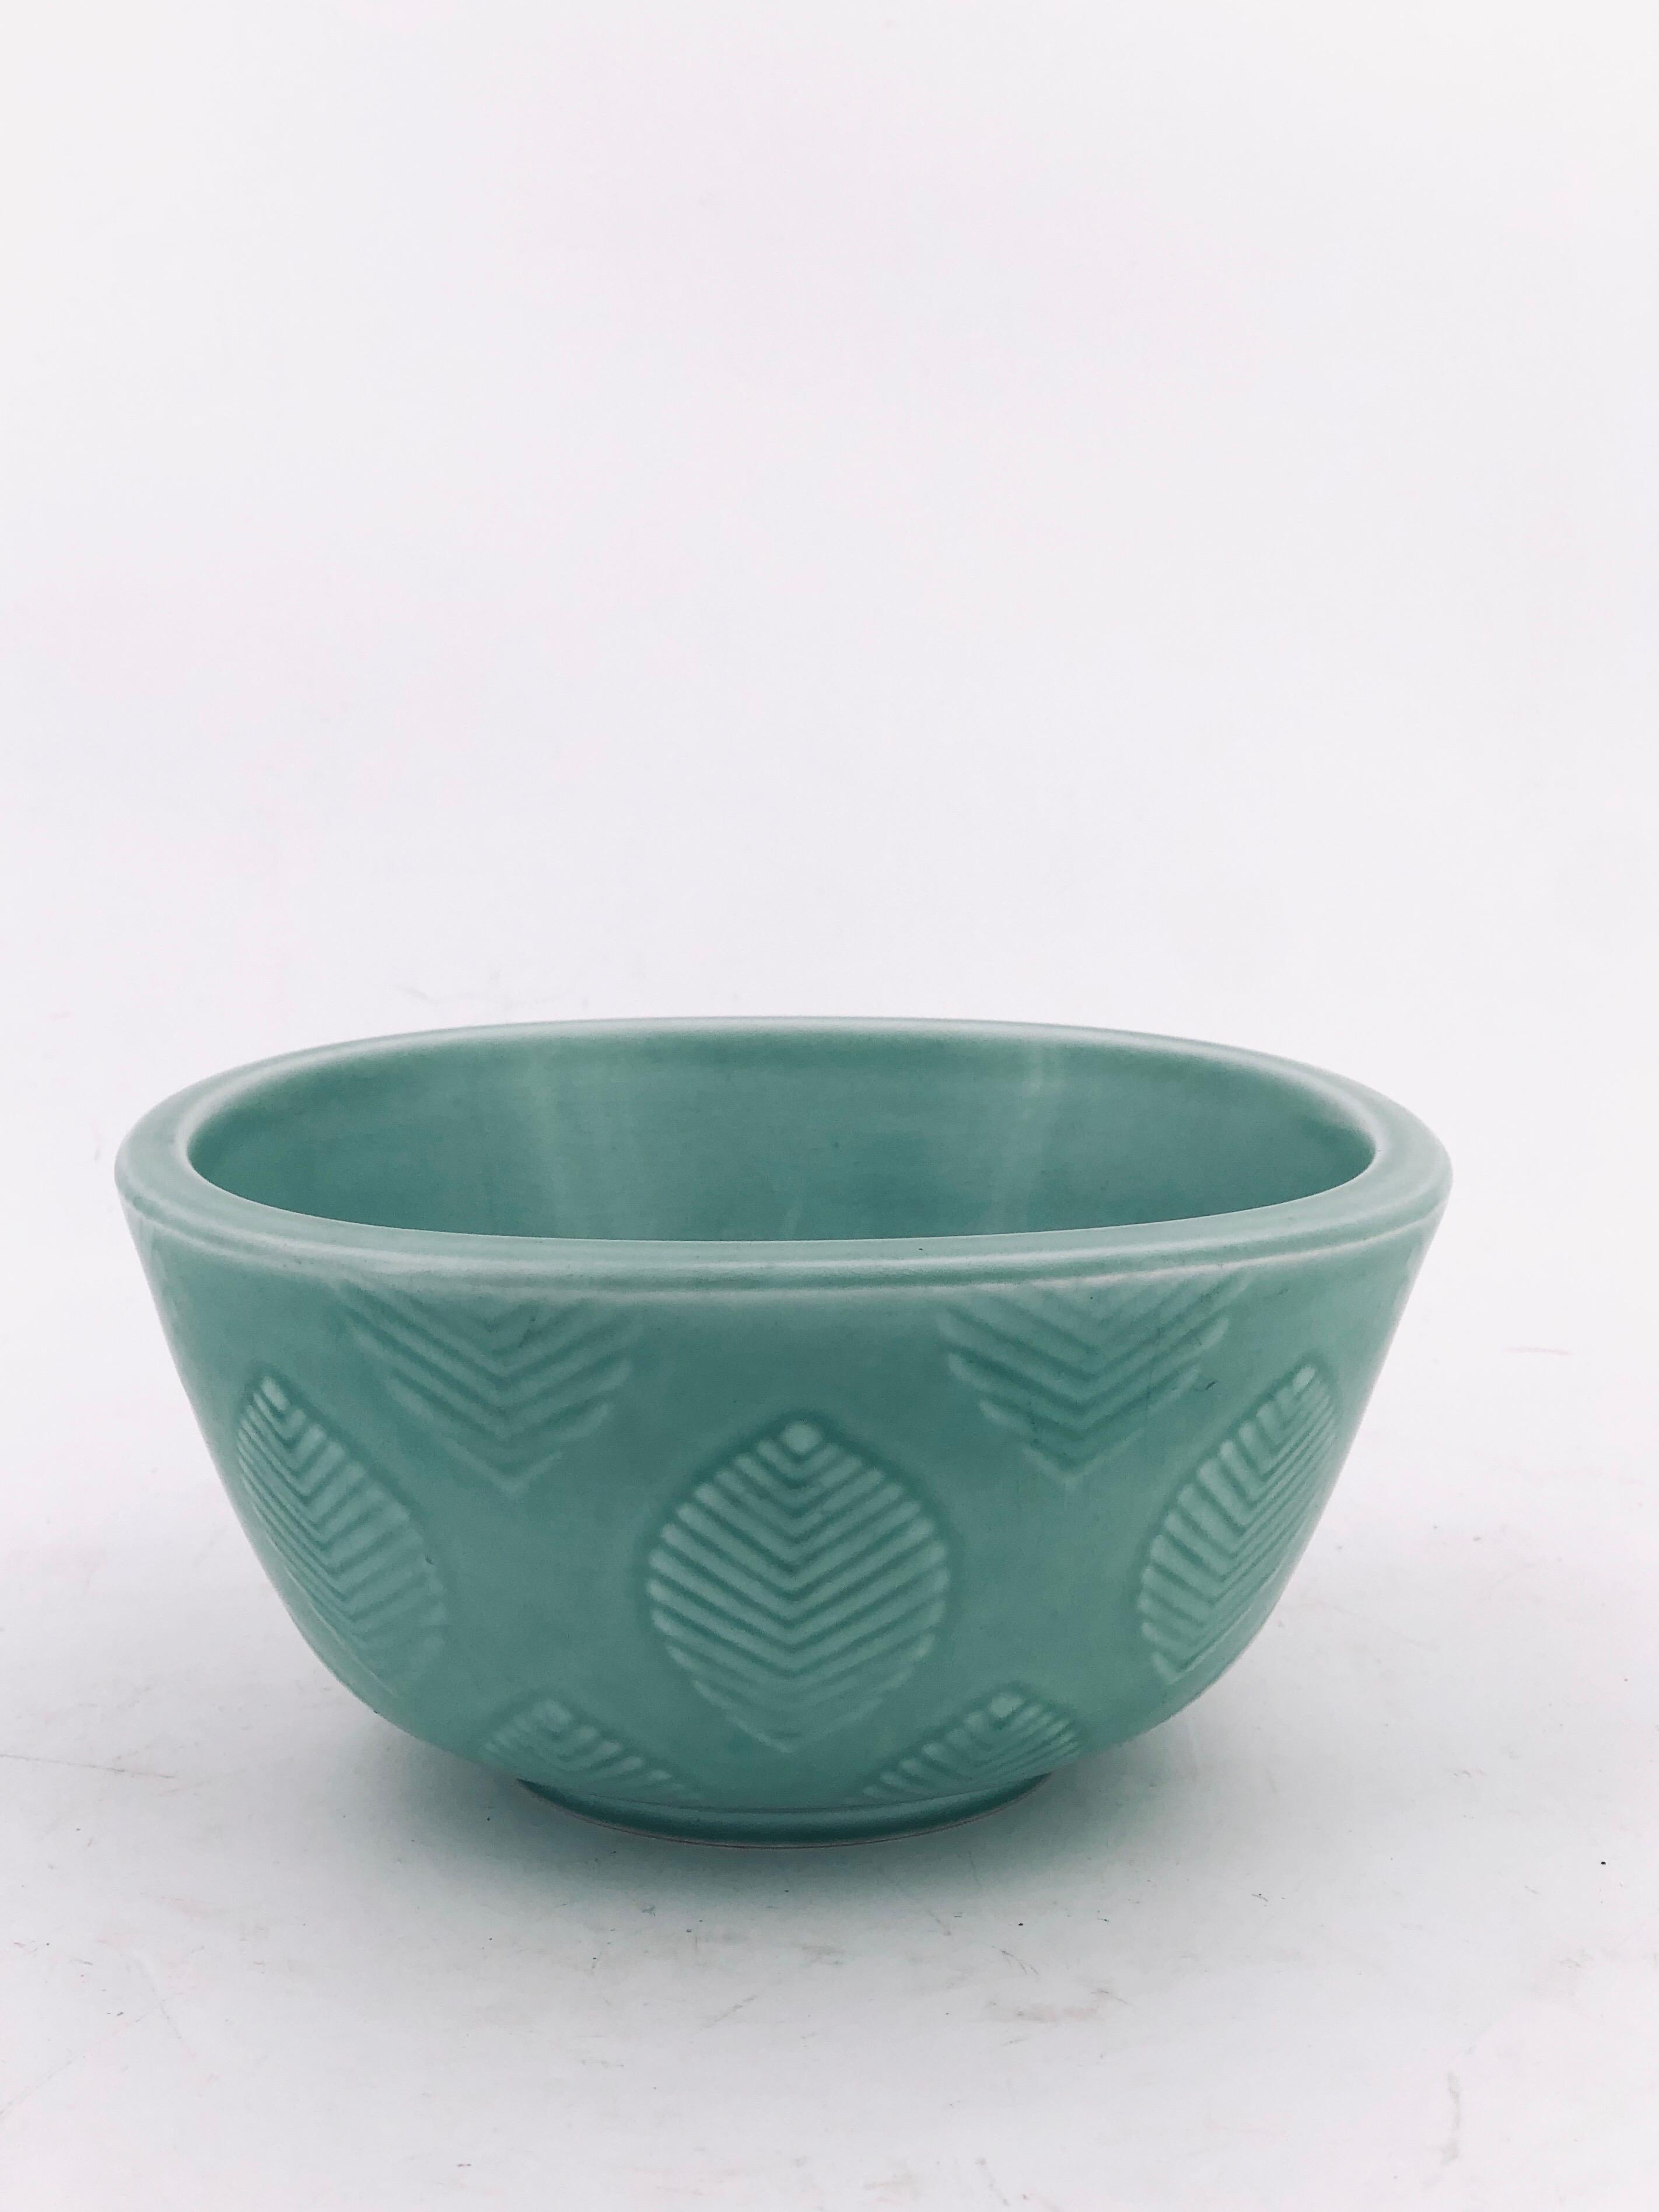 Danish ceramic “Marselis” vase bowl series designed by Nils Thorsson for Royal Copenhagen, circa 1950s, beautiful color and pattern.